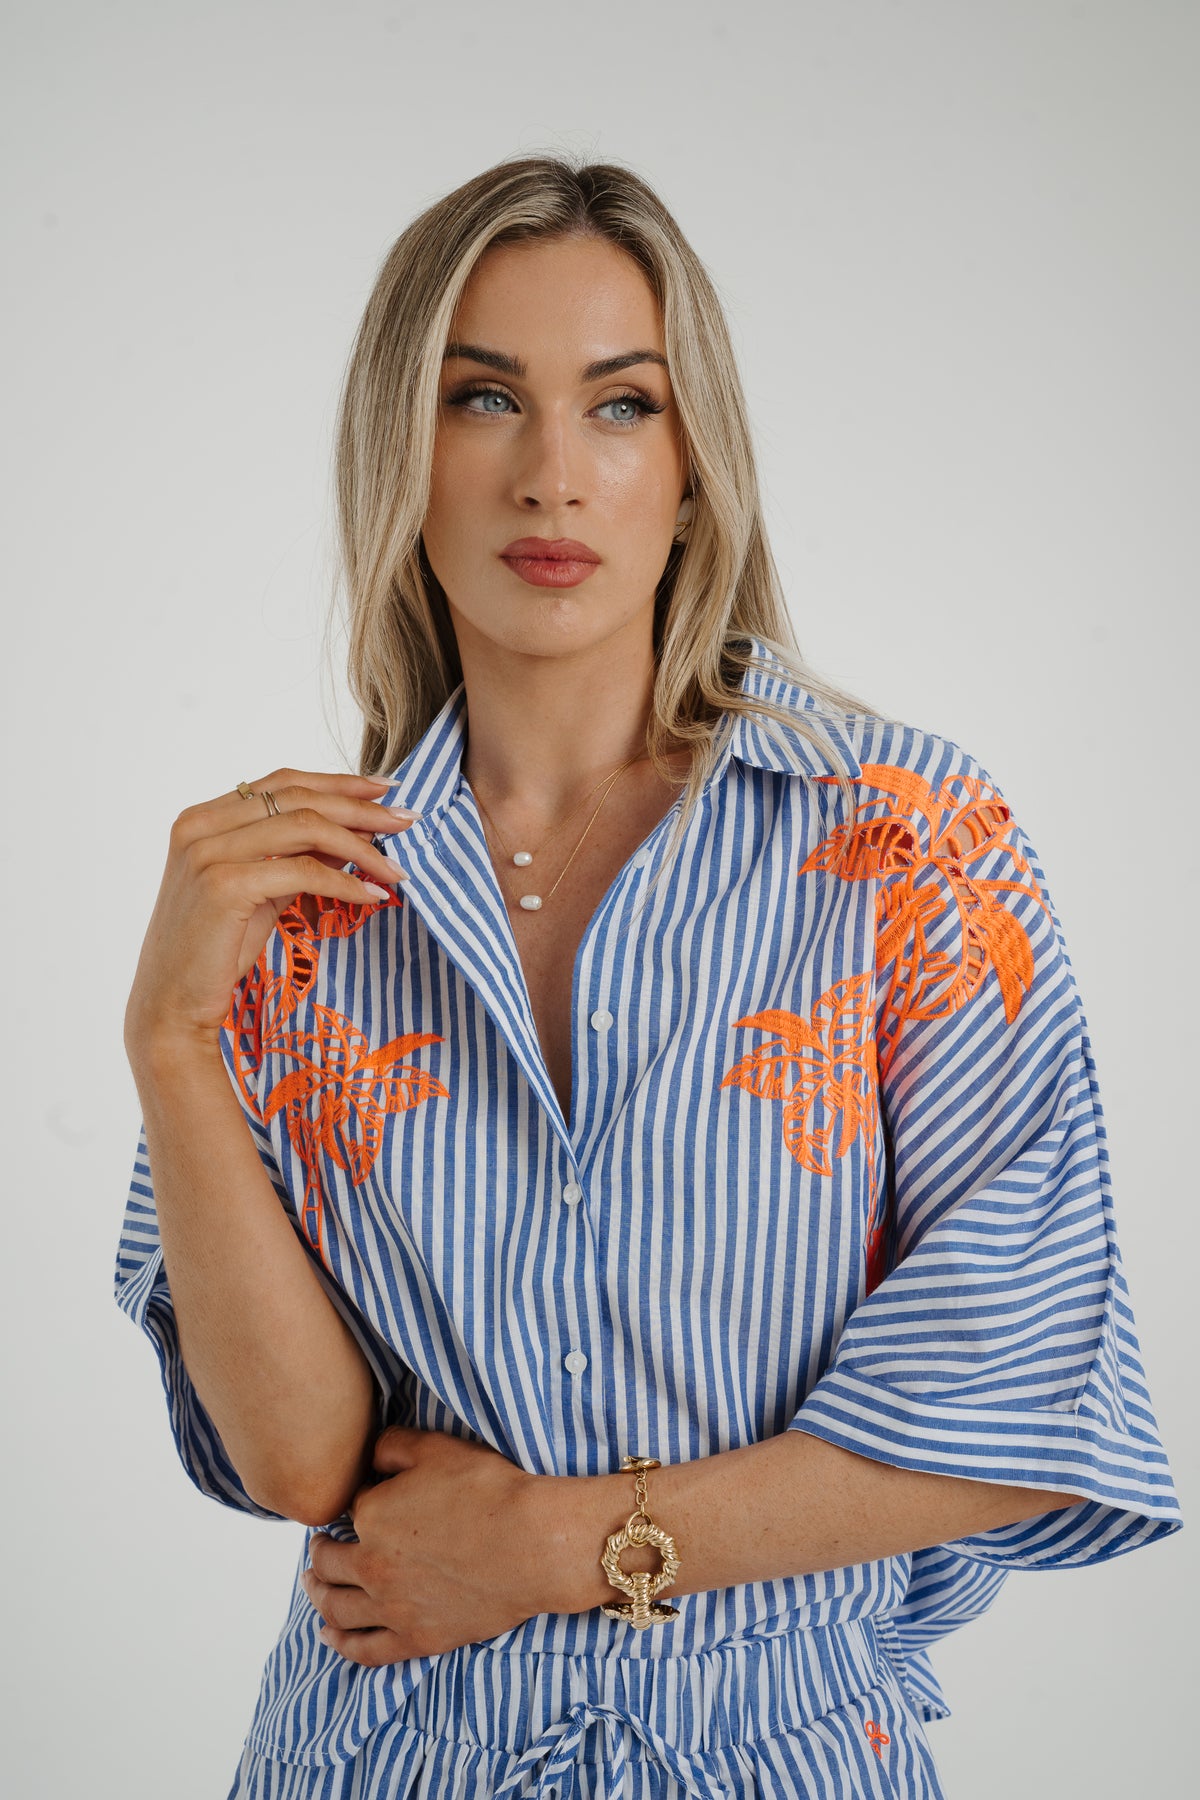 Millie Embroidered Palm Shirt In Blue Stripe